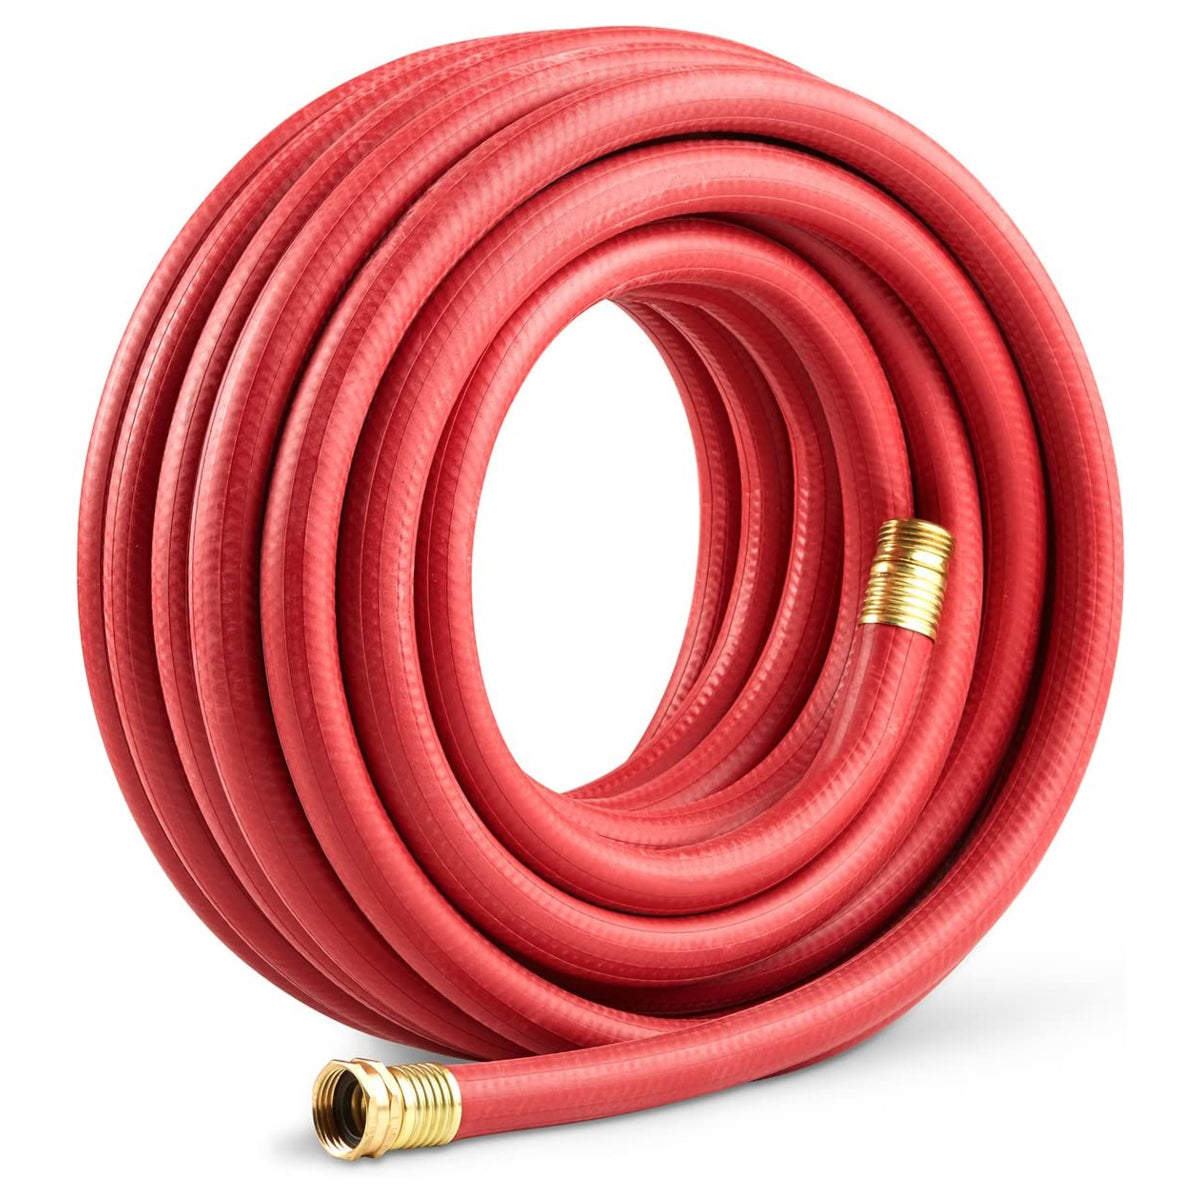 Gilmour 886751-1001/81857 Heavy Duty Reinforced Rubber Hose, Red